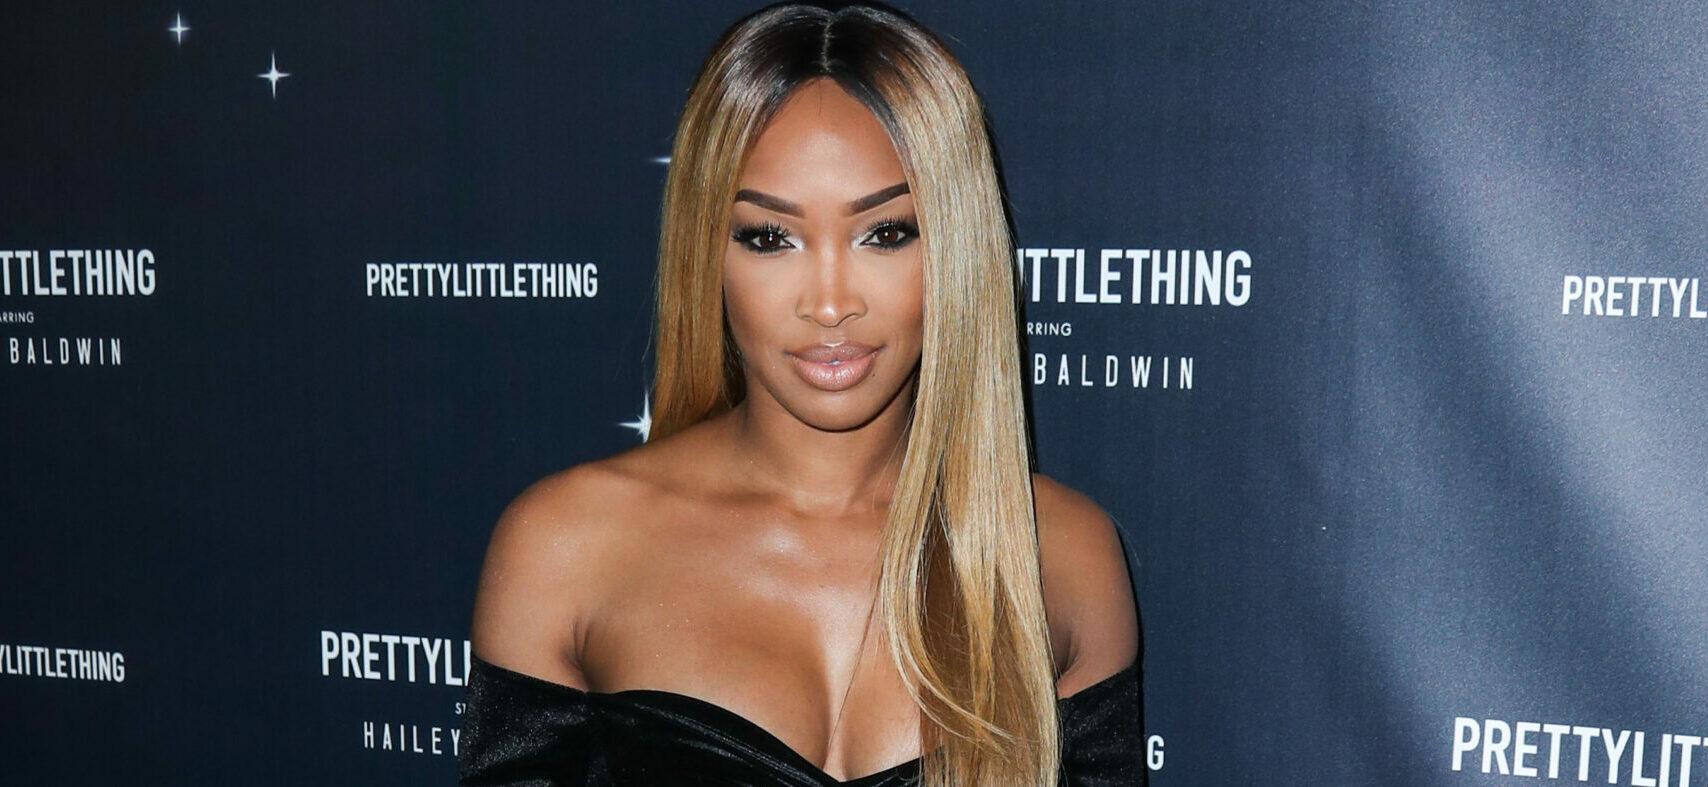 Malika Haqq and O.T. Genasis Welcome Son Ace Flores. Malika Haqq's new baby boy is the first for the reality star, while her ex O.T. Genasis is also dad to son Genasis, who turns 10 this month. Malika Haqq welcomed her son with ex-boyfriend O.T. Genasis on March 14, 2020, the Keeping Up with the Kardashians star announced on Instagram Monday. 17 Mar 2020 Pictured: Malika Haqq. Photo credit: Xavier Collin/Image Press Agency / MEGA TheMegaAgency.com +1 888 505 6342 (Mega Agency TagID: MEGA631322_005.jpg) [Photo via Mega Agency]